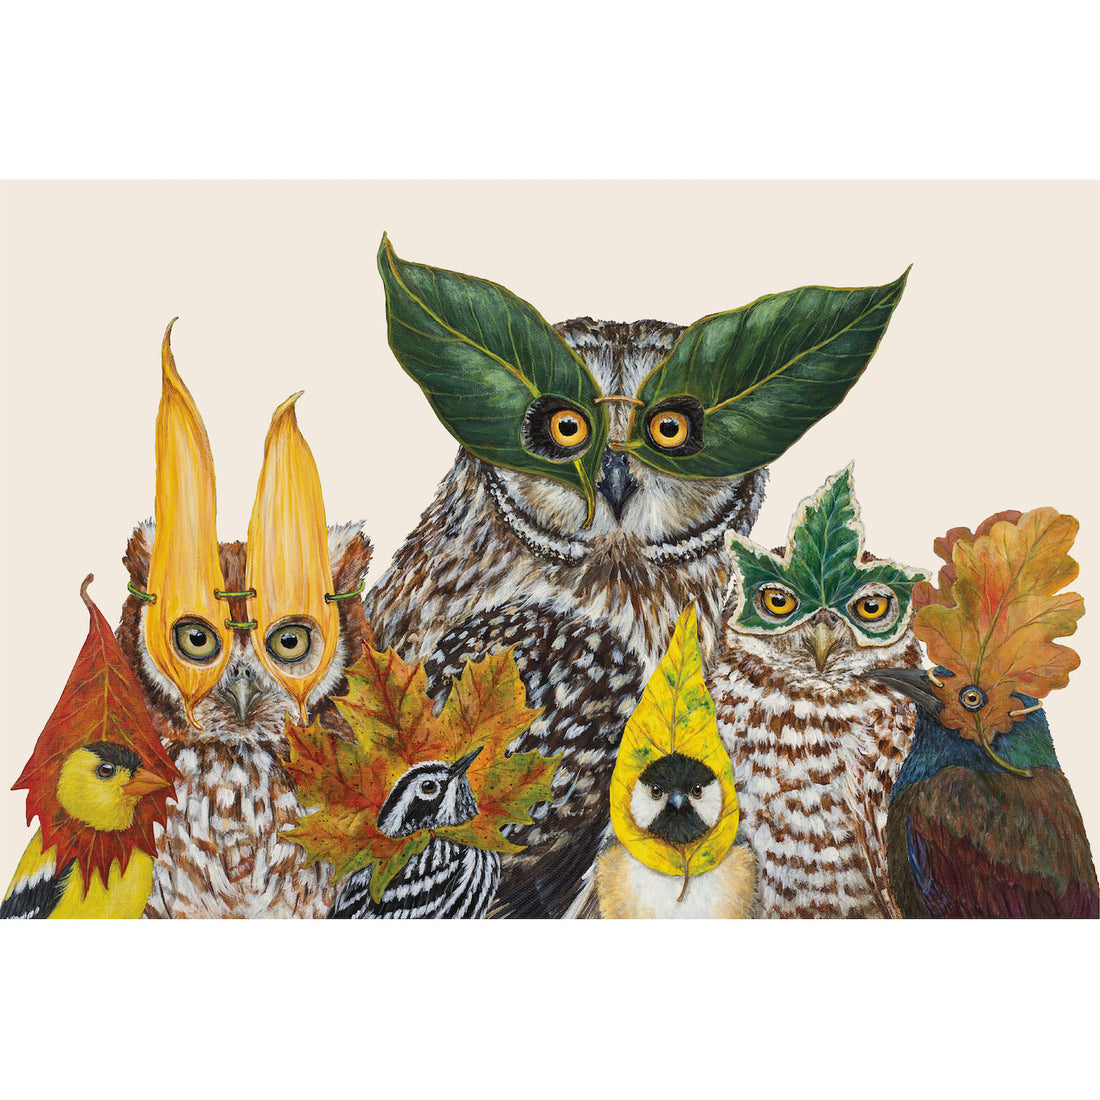 The illustrated faces of seven various birds, each wearing a mask made of different leaves in fall colors or green, on a white background.